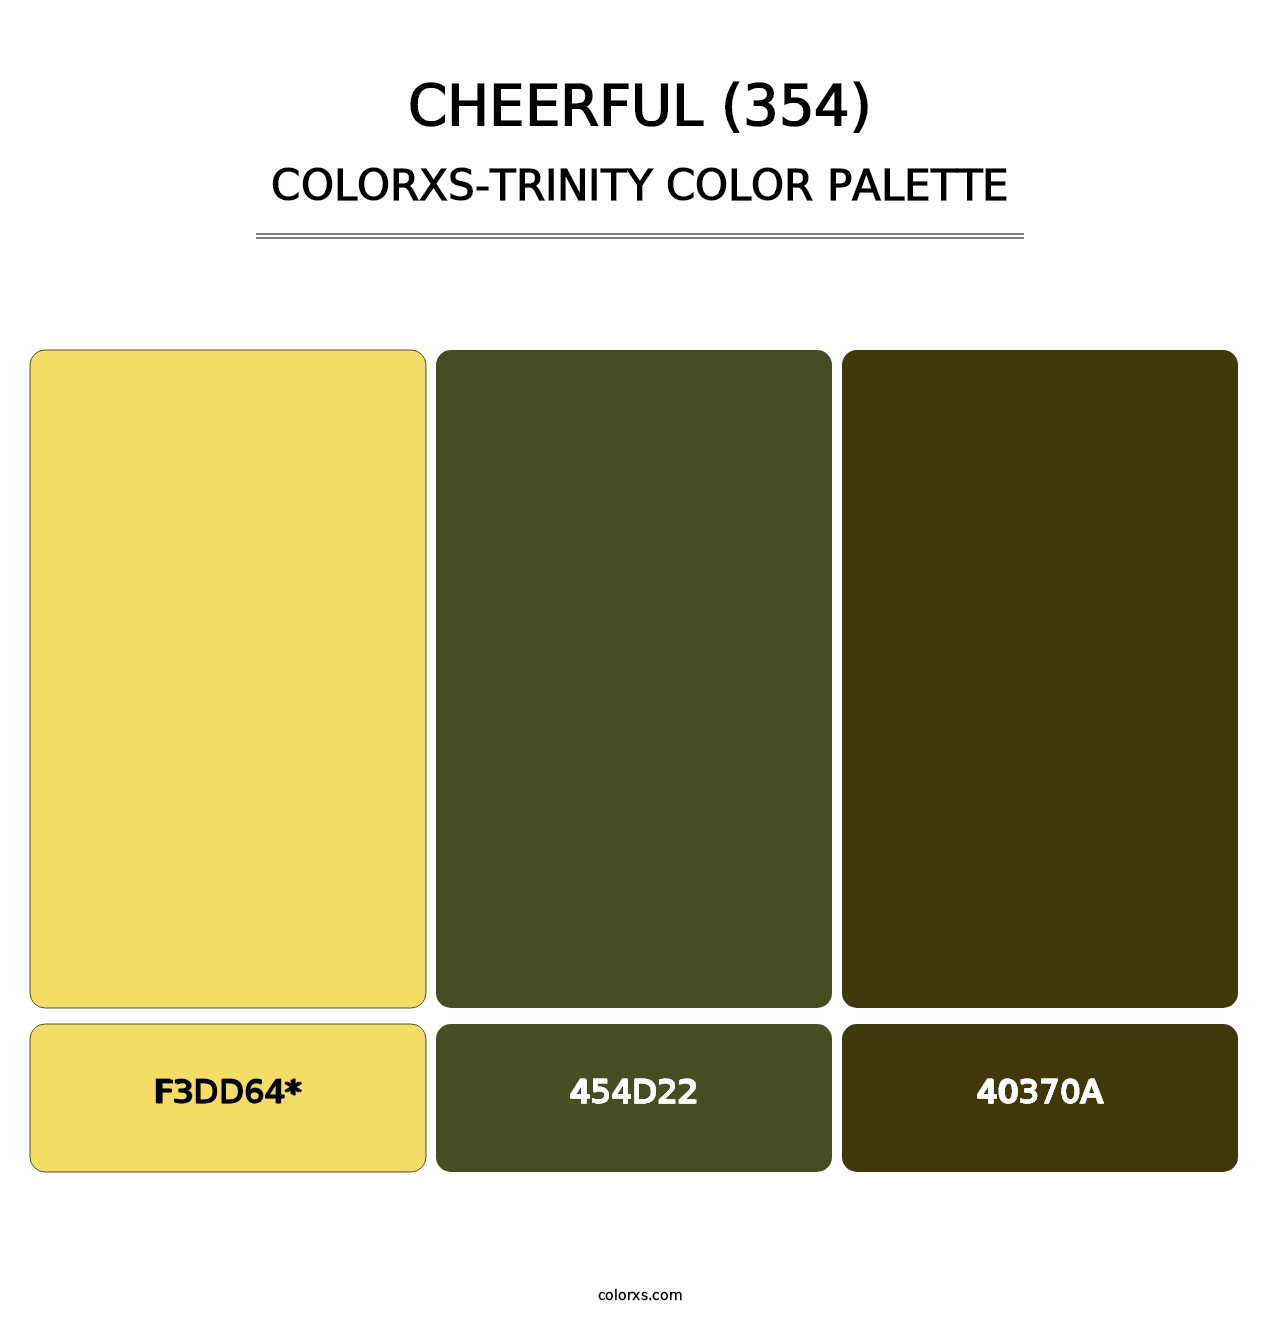 Cheerful (354) - Colorxs Trinity Palette